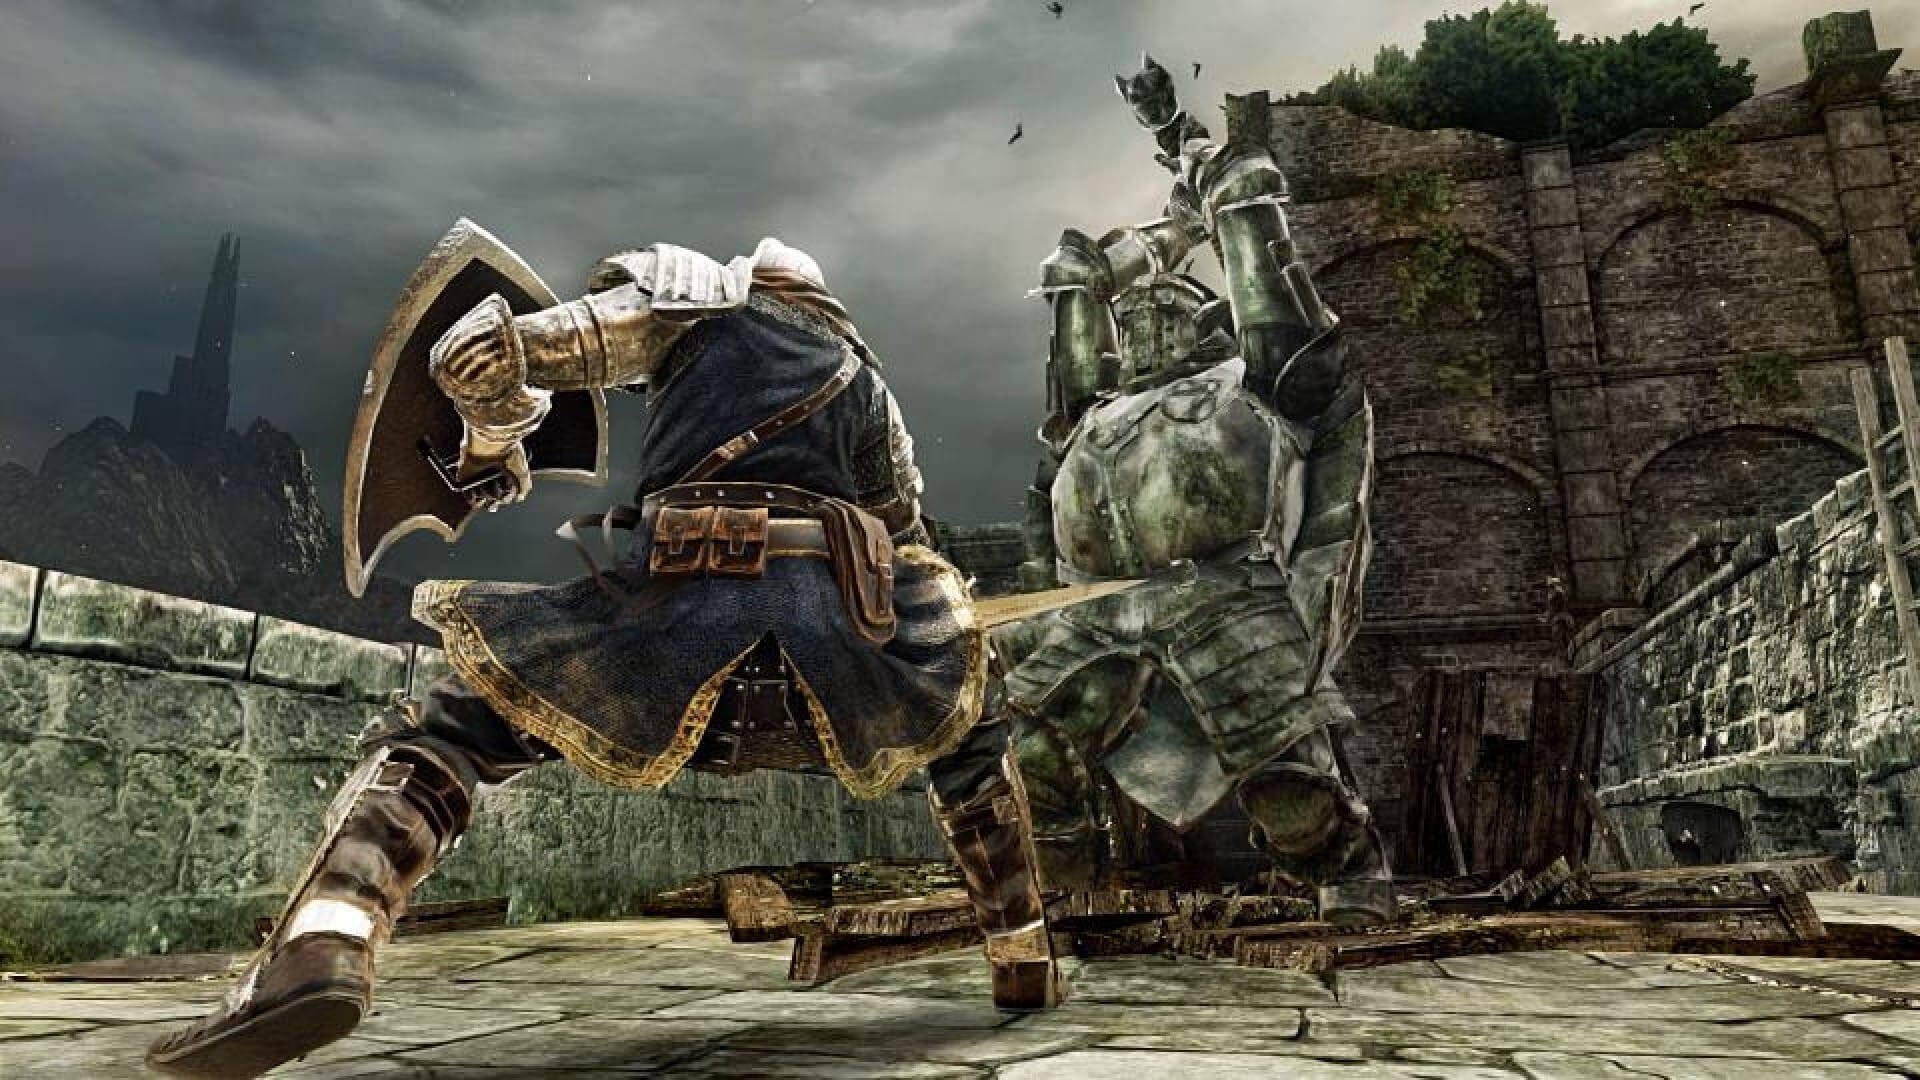 DARK SOULS II: Scholar of the First Sin Steam Key for PC - Buy now